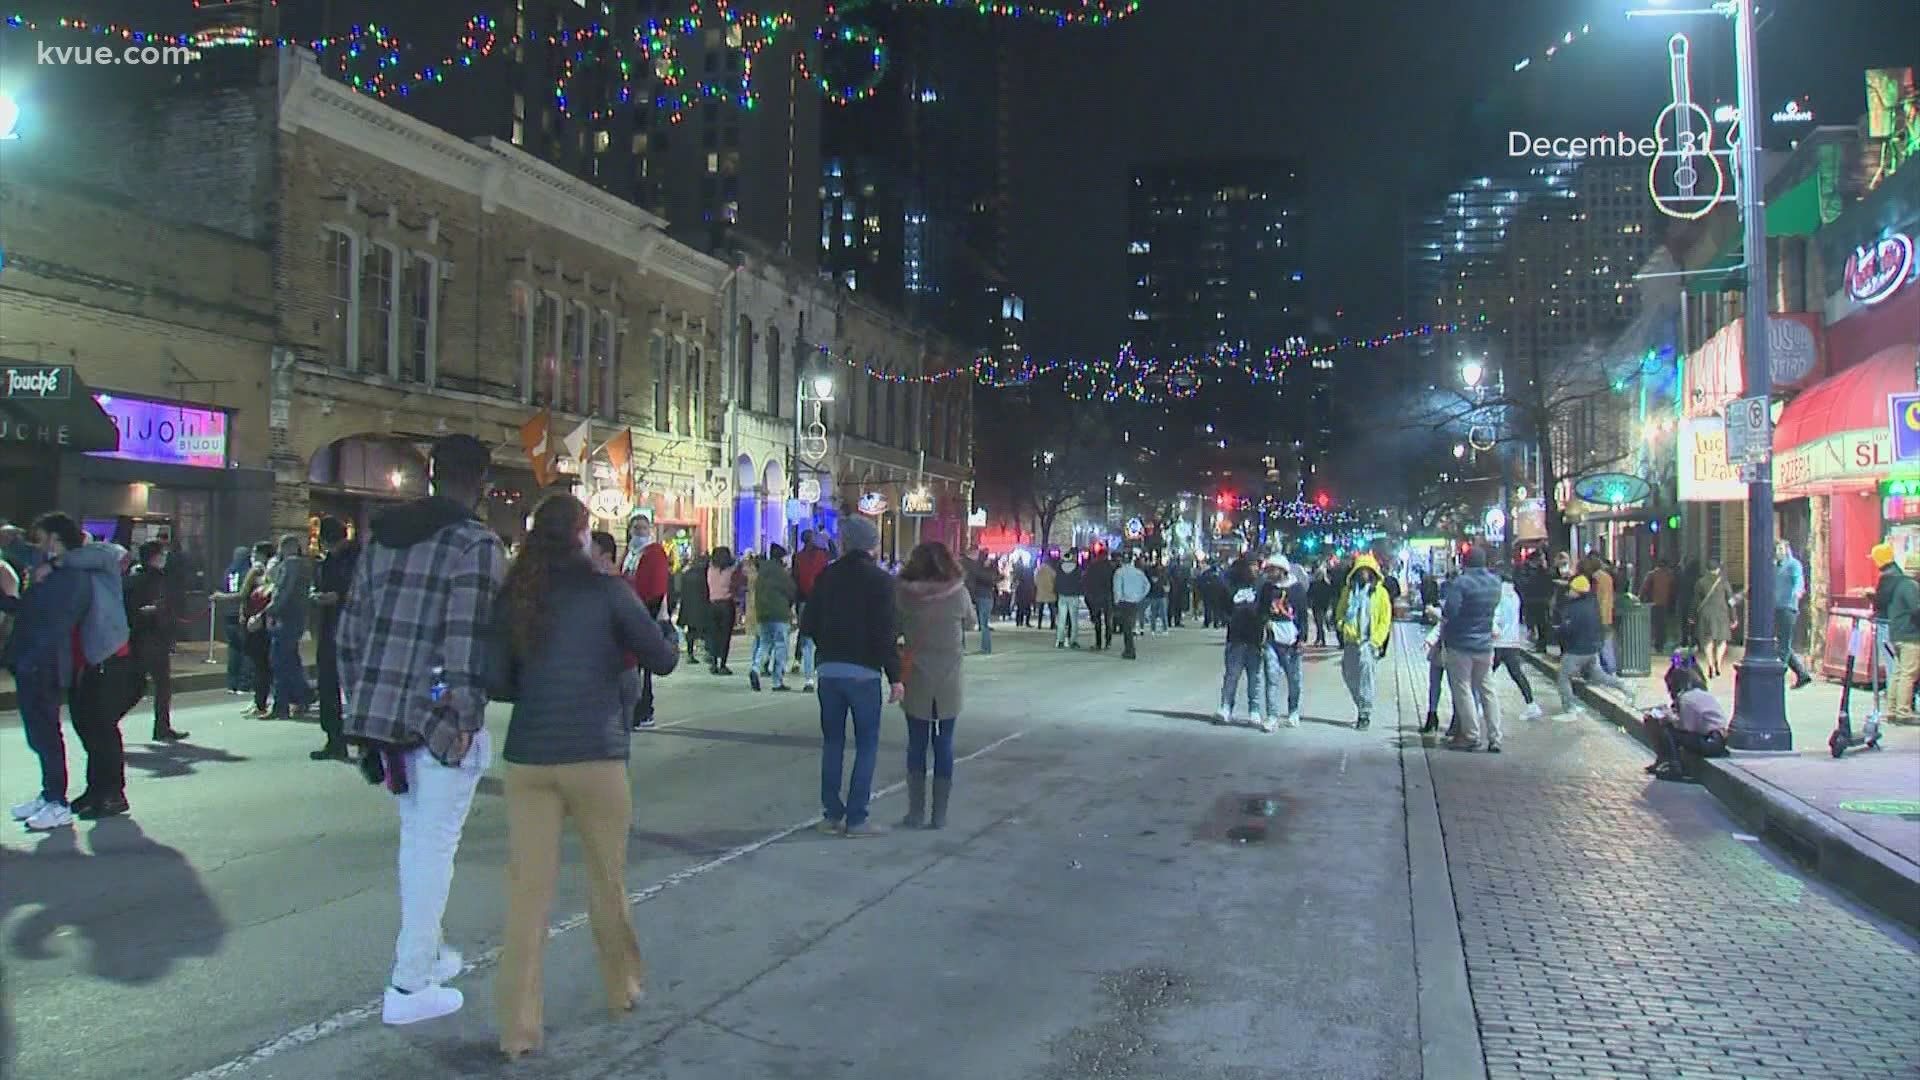 On Sixth Street throughout New Year's Eve, there were long lines to get into the bars downtown.